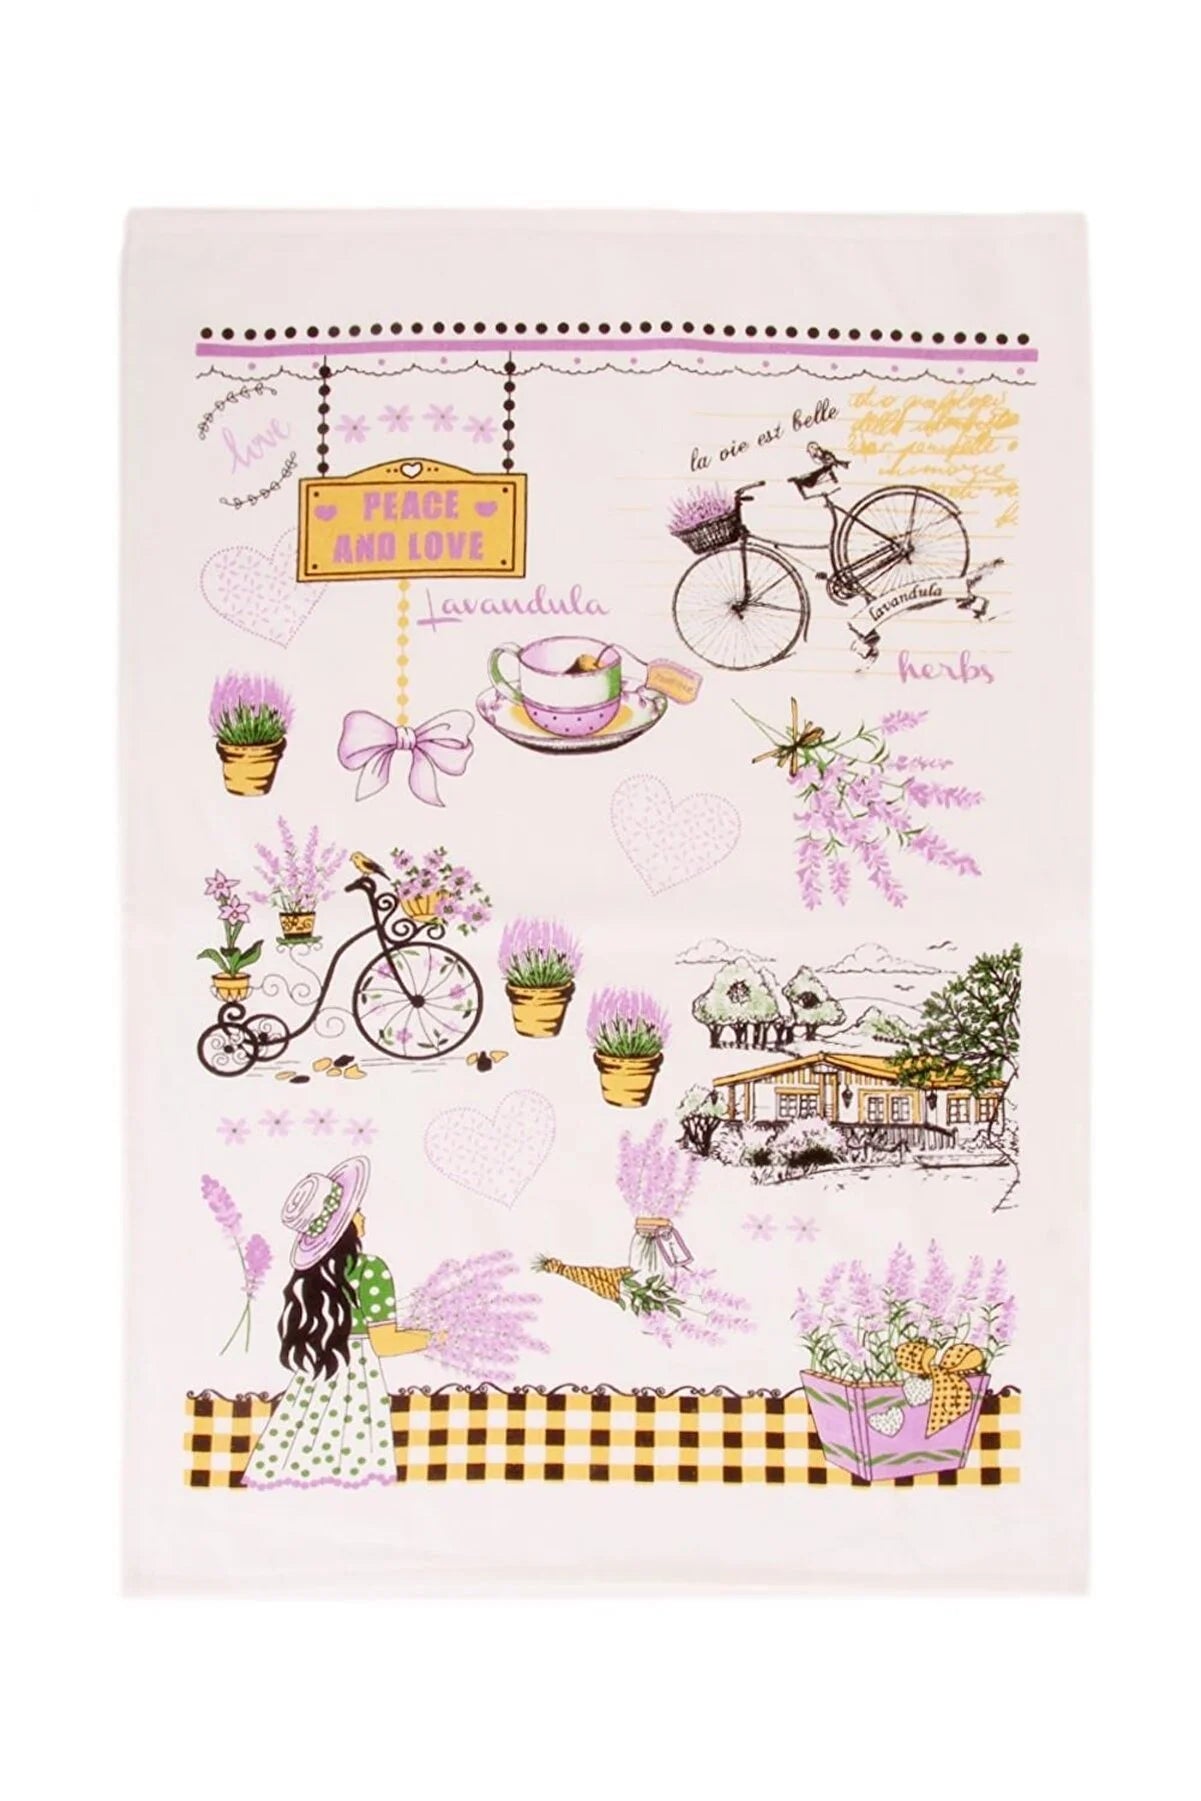 2 Pieces 100% Cotton 50x70 Printed Kitchen Drying Towels